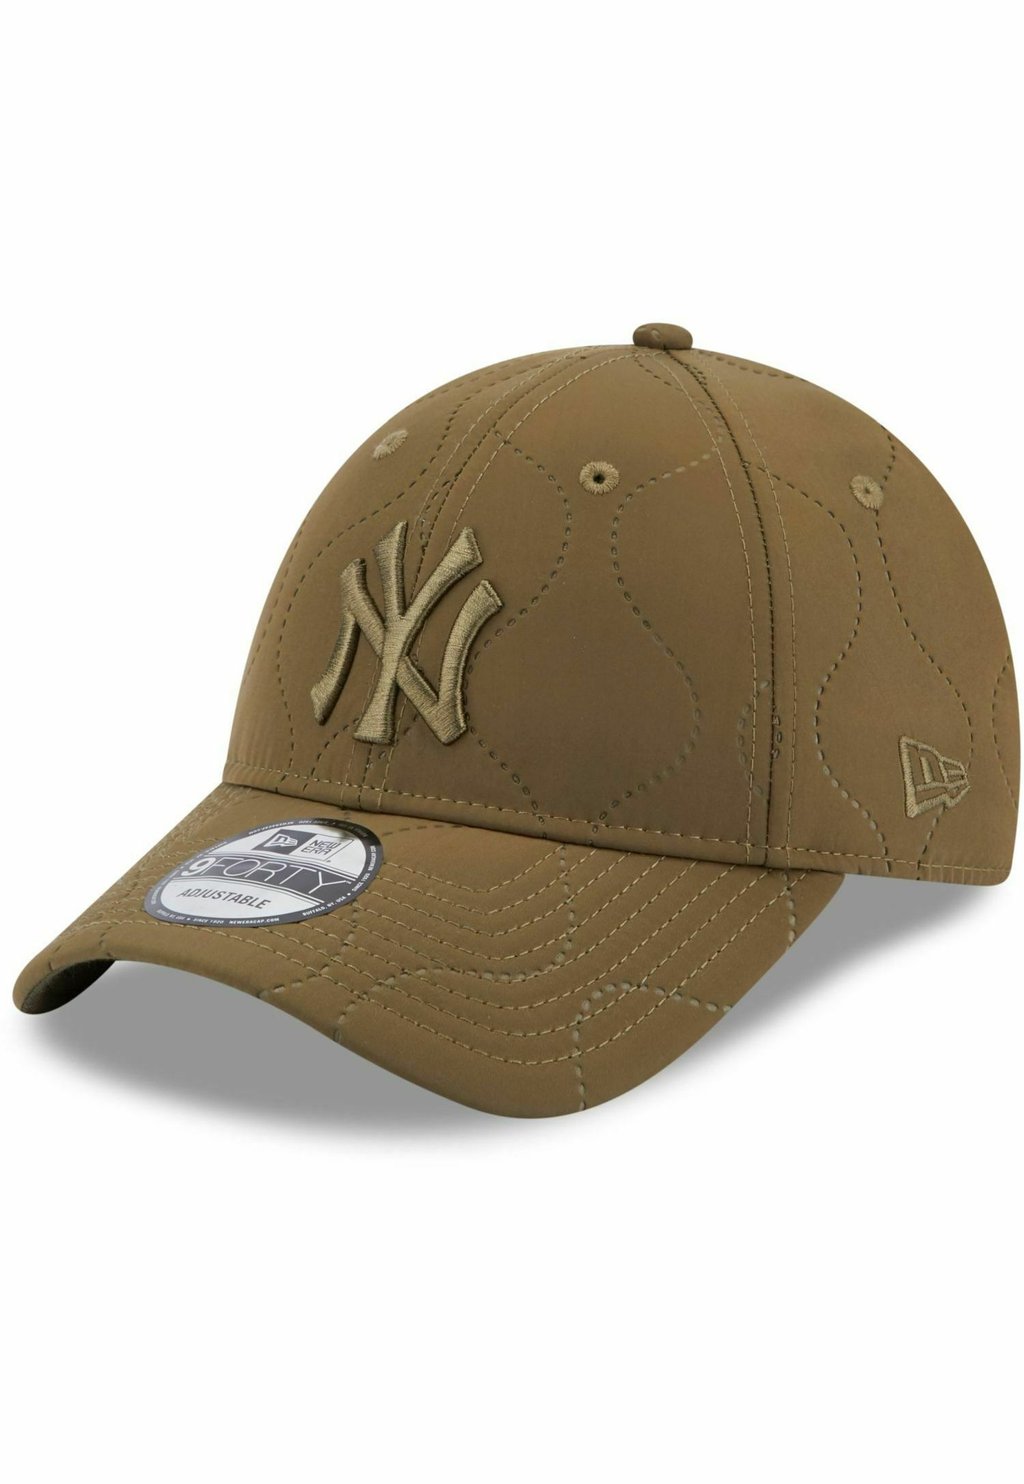 Бейсболка 9FORTY QUILTED NEW YORK YANKEES New Era, цвет olive